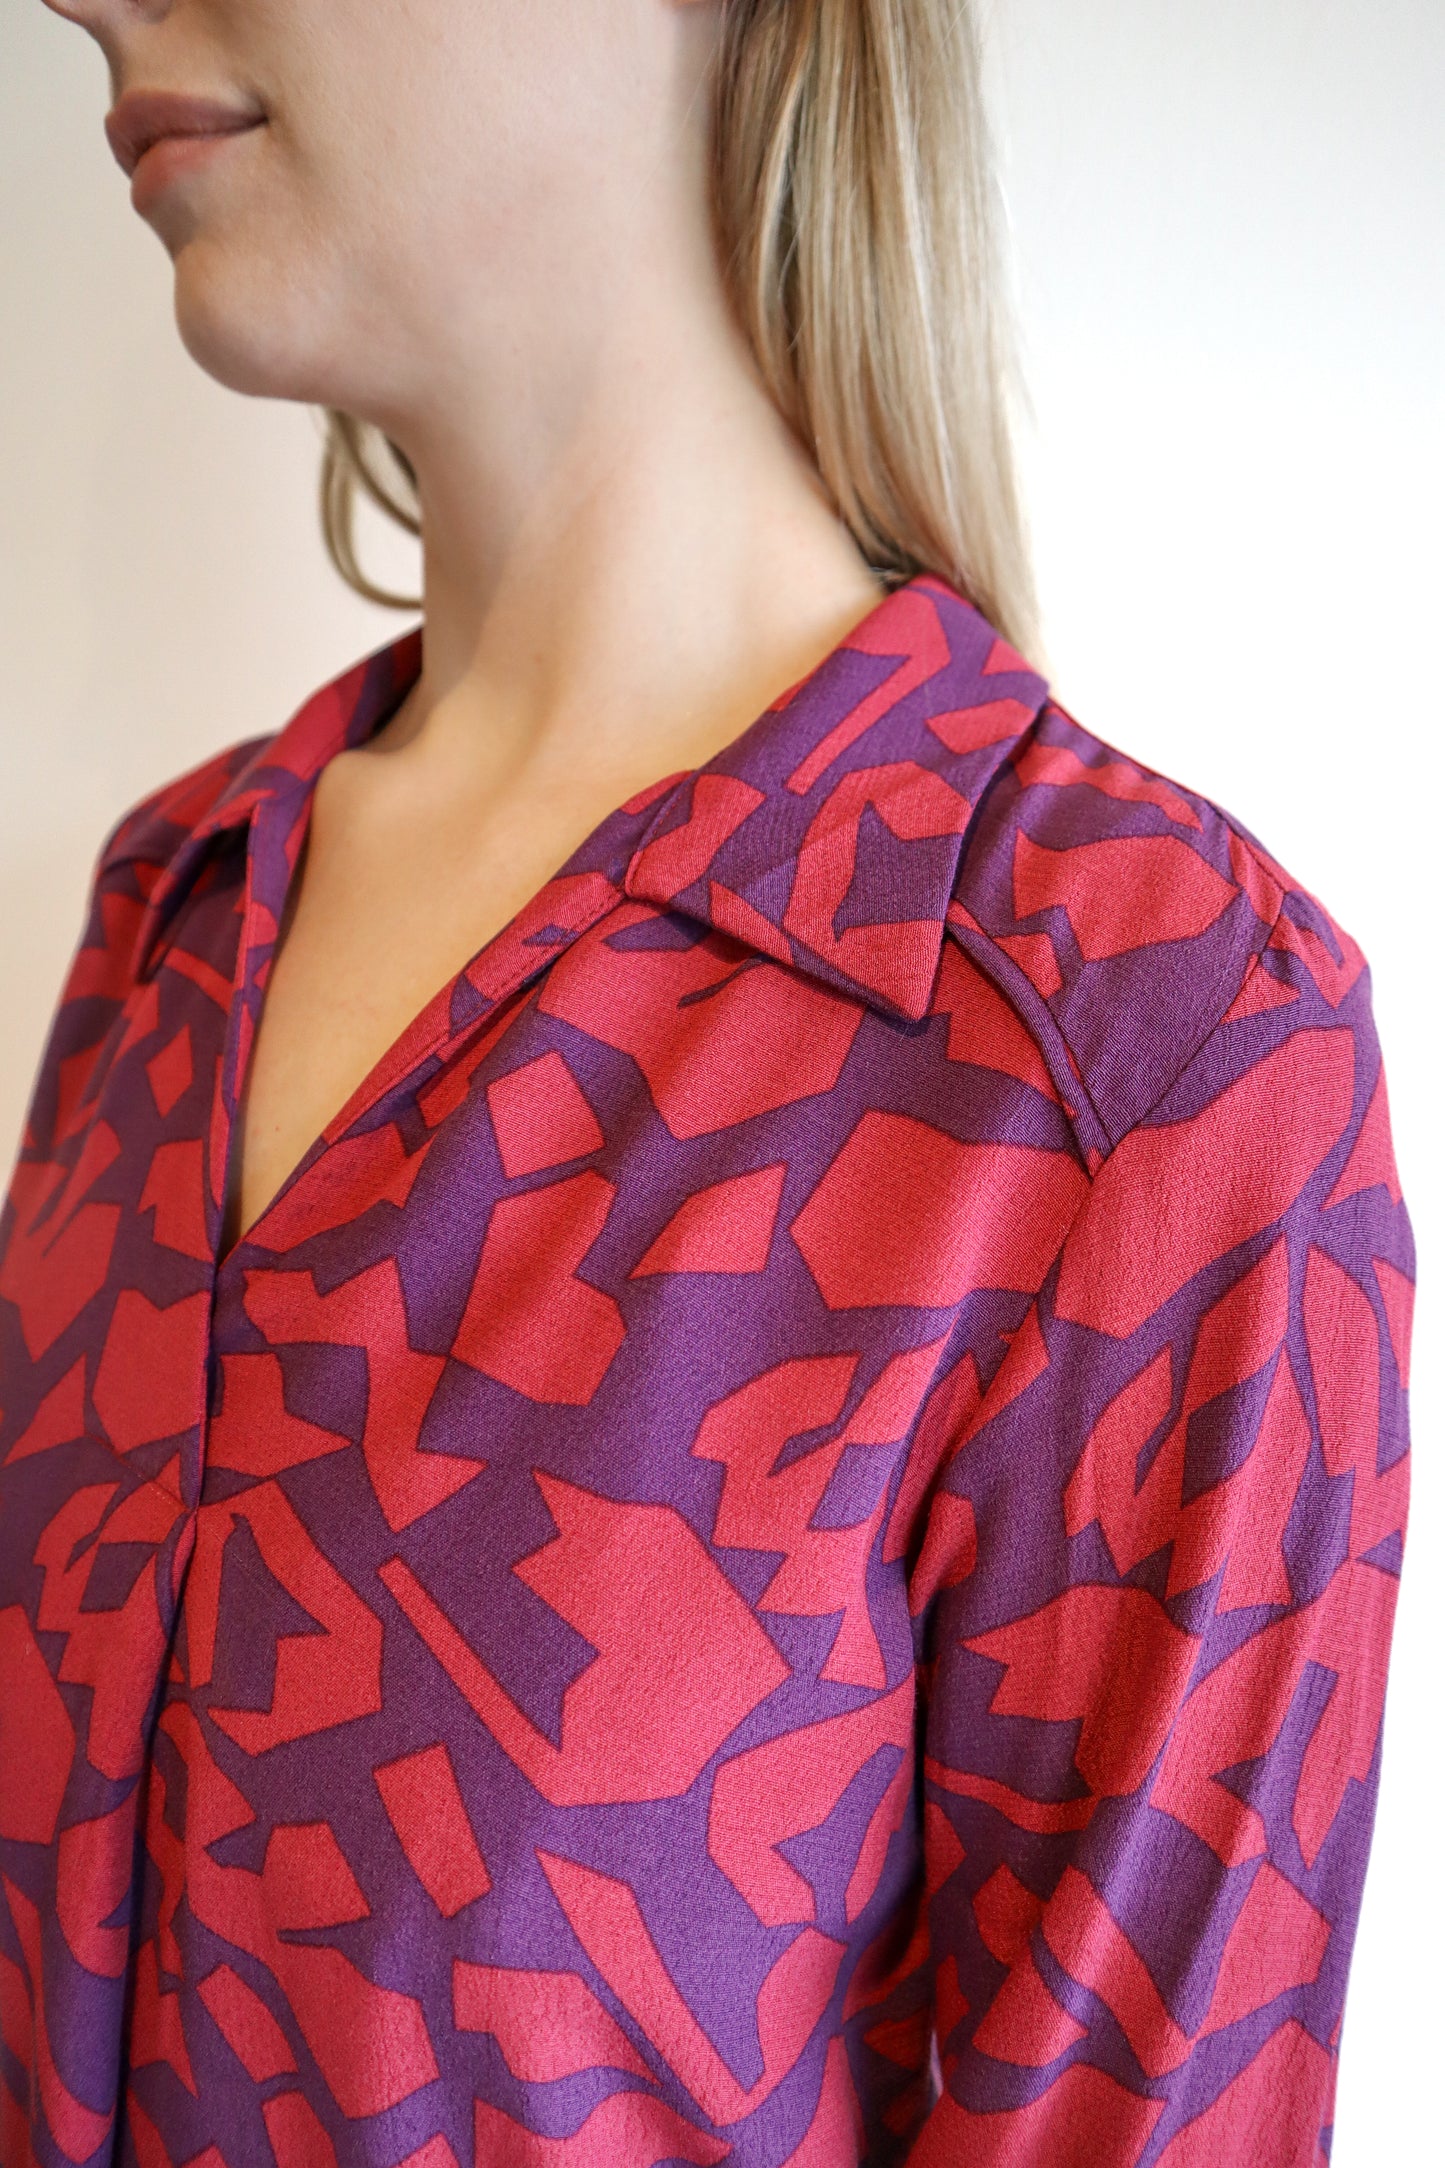 geometric patterned top